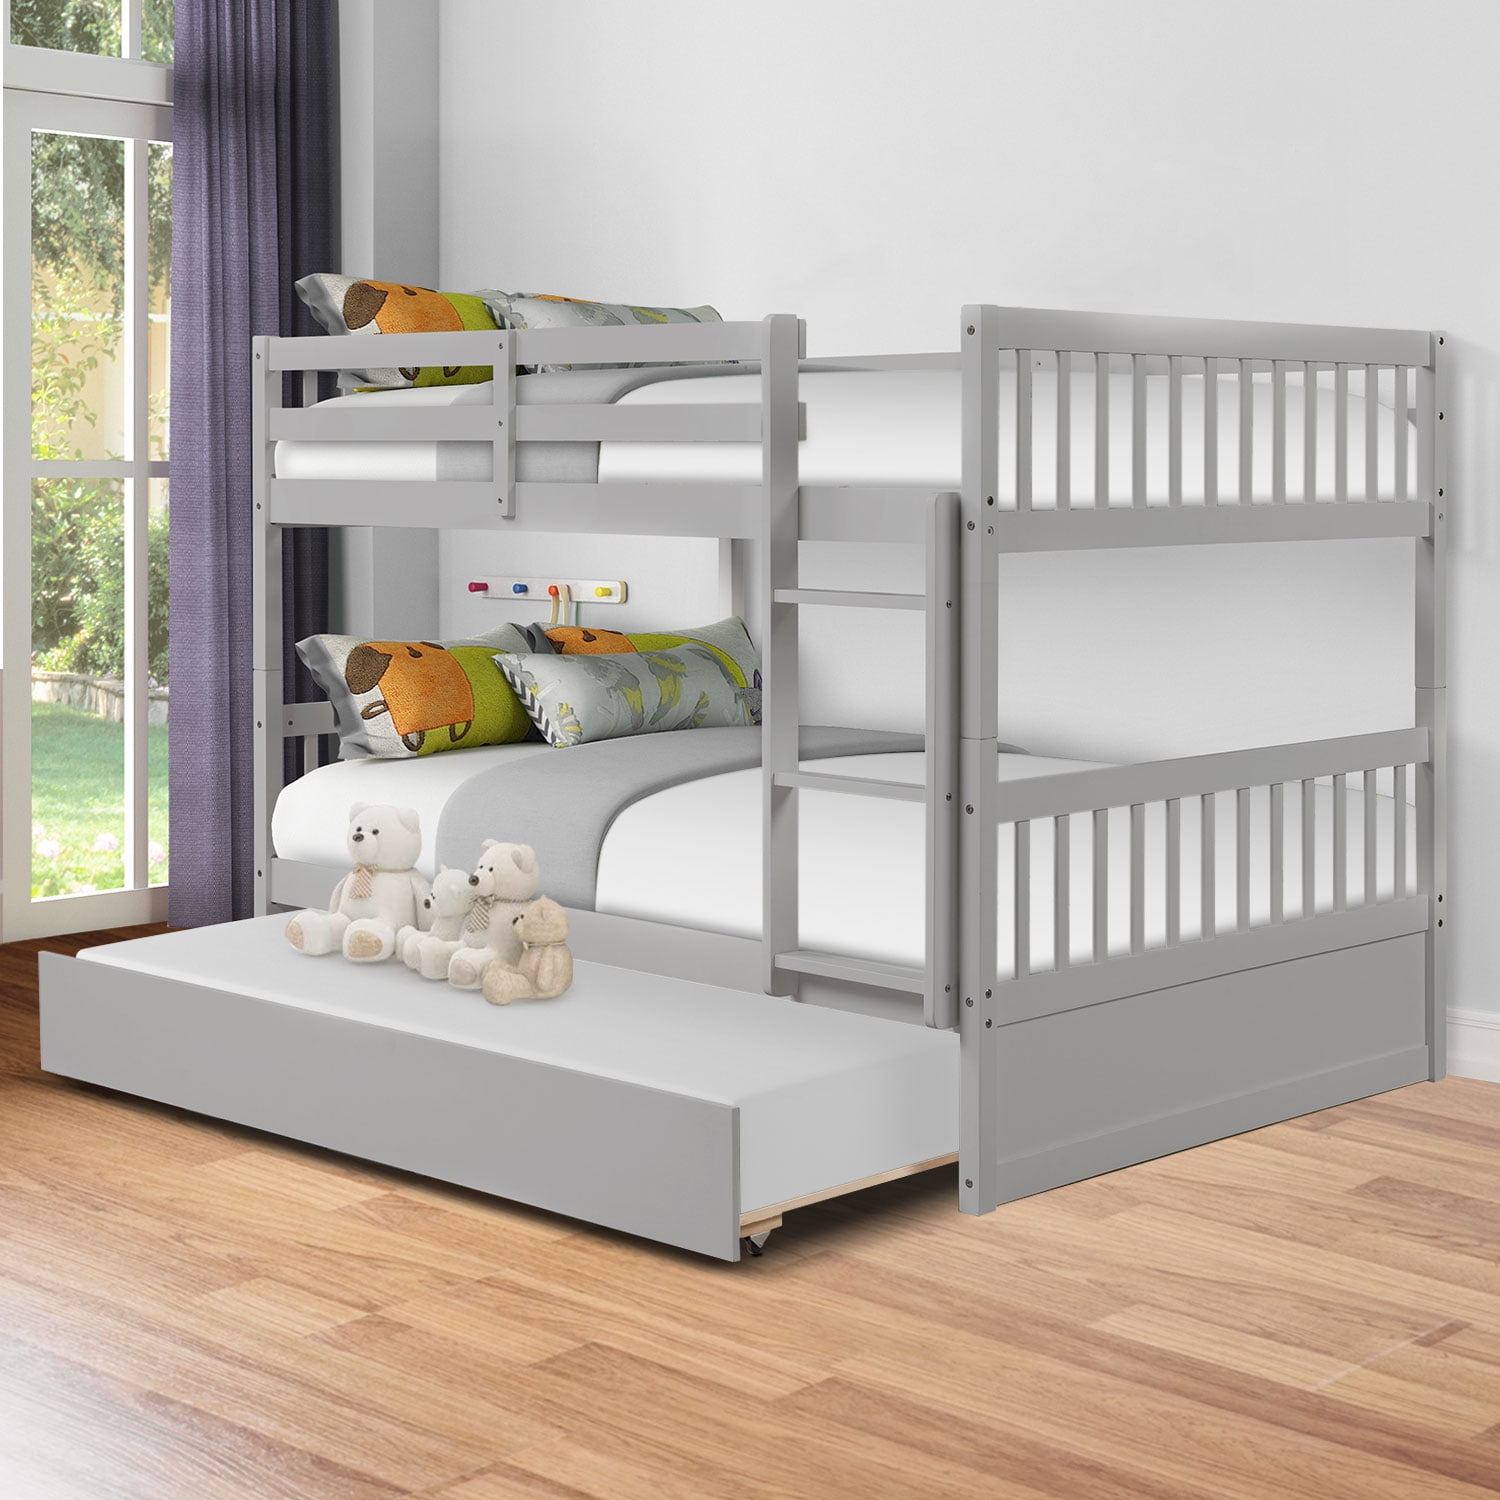 Trundle Sweden Pine Wood Bunk Beds, Bunk Beds That Can Be Separated